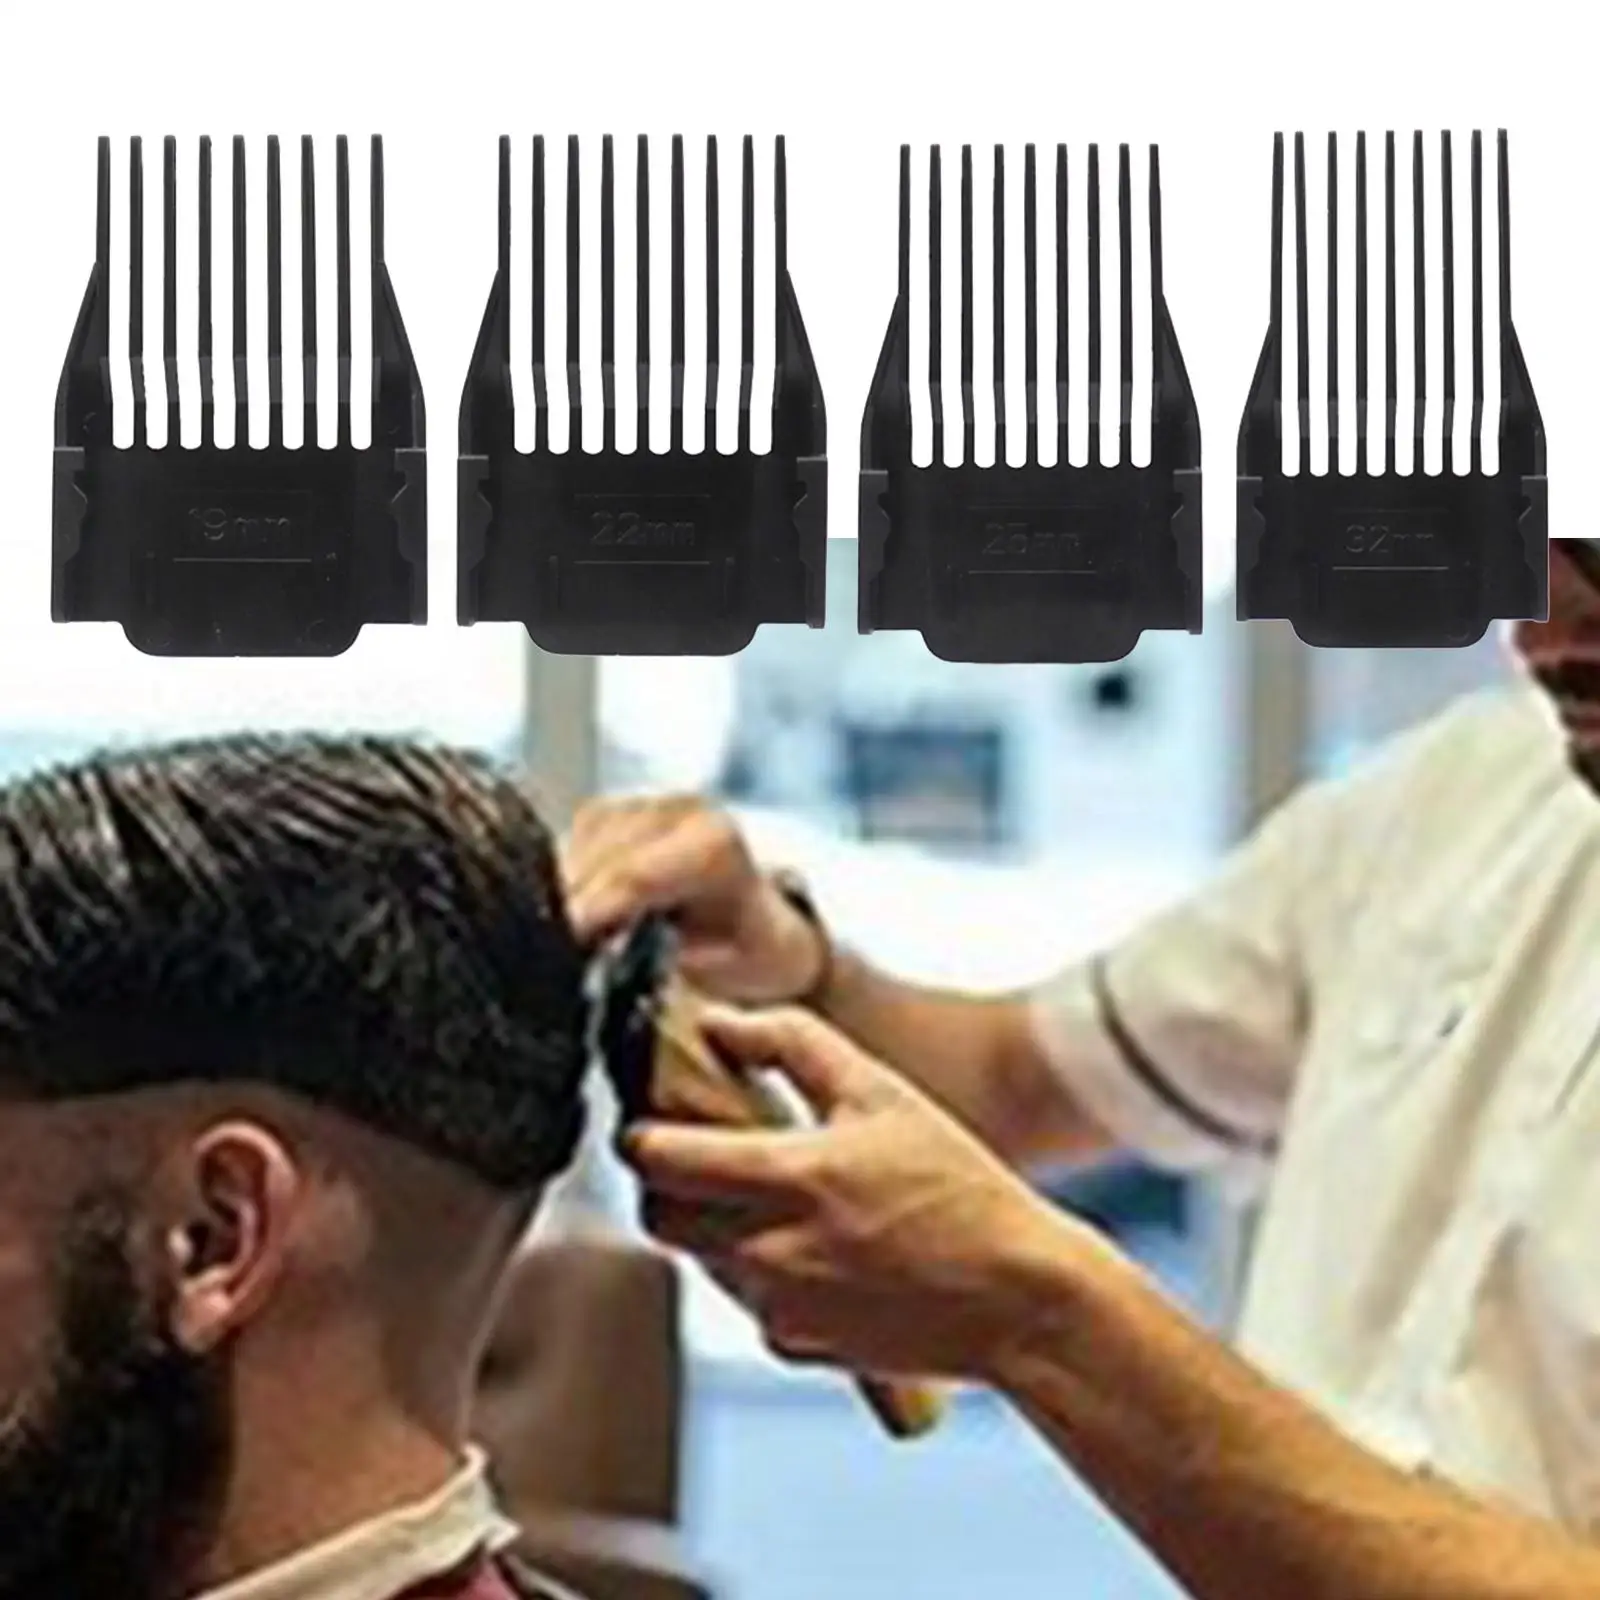 4Pcs Hair  Combs Hair  Combs Professional Universal Hair Limit Comb for Hair Clippers/s Stylists and Barbers